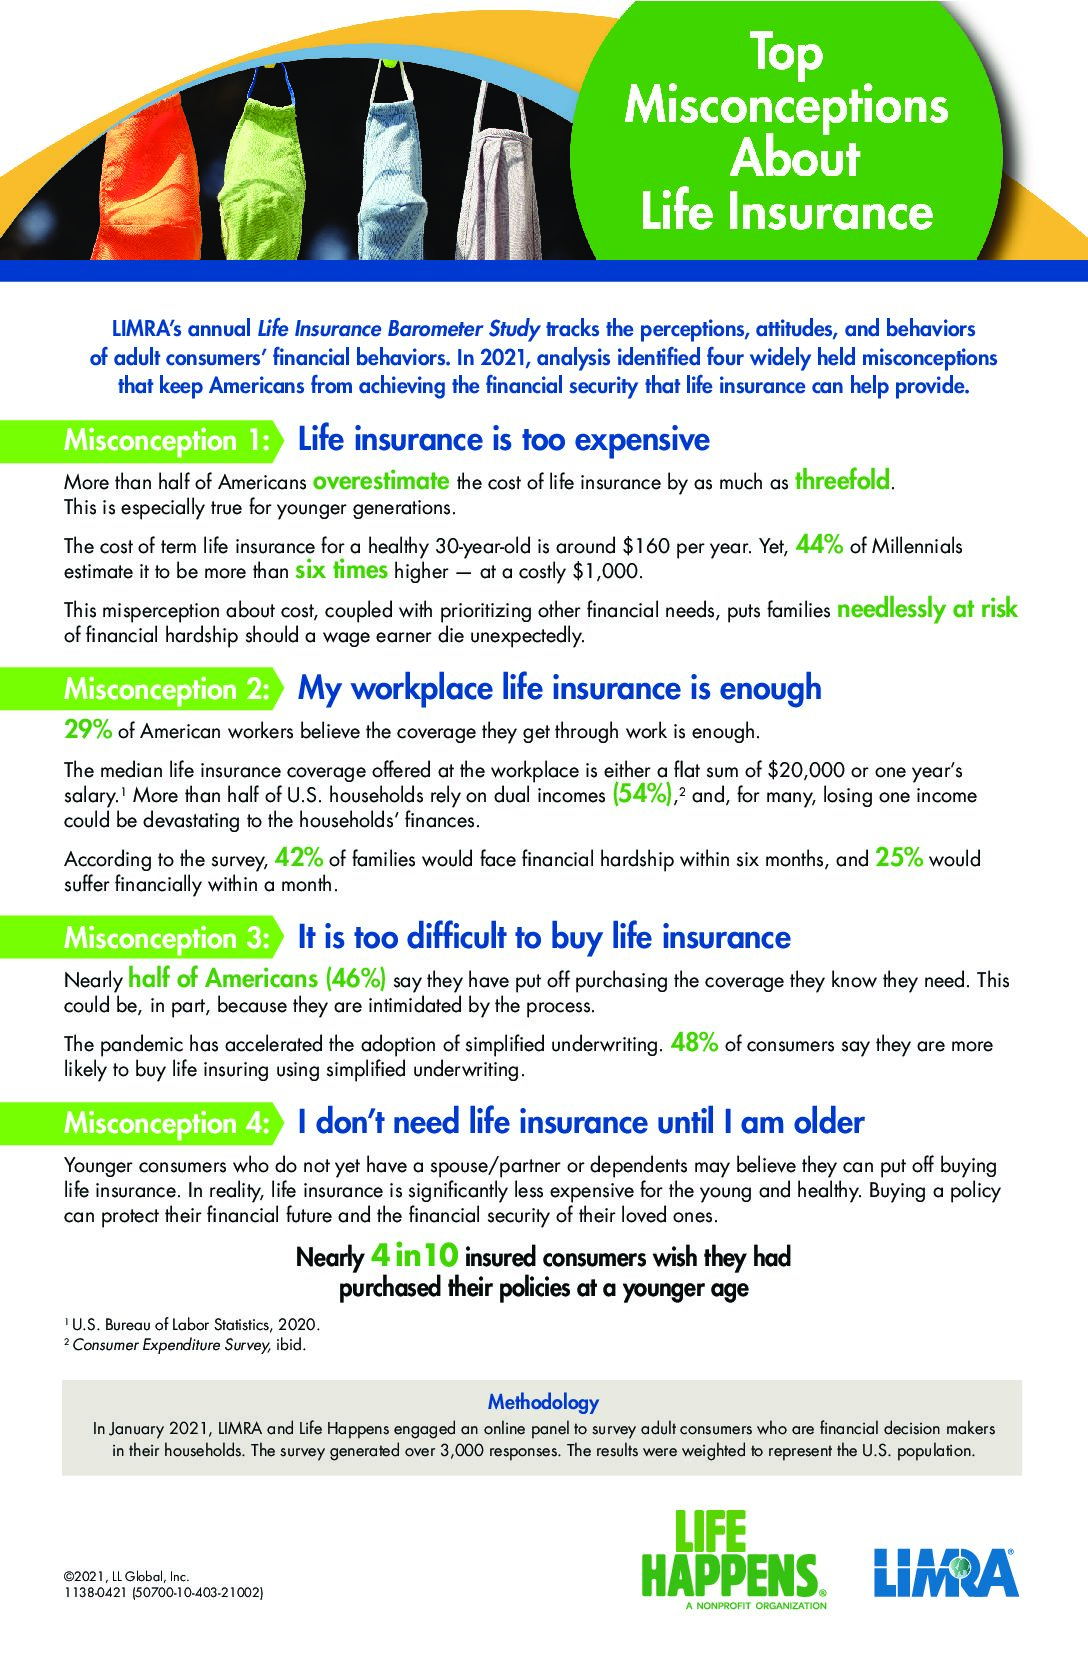 Top Misconceptions About Life Insurance